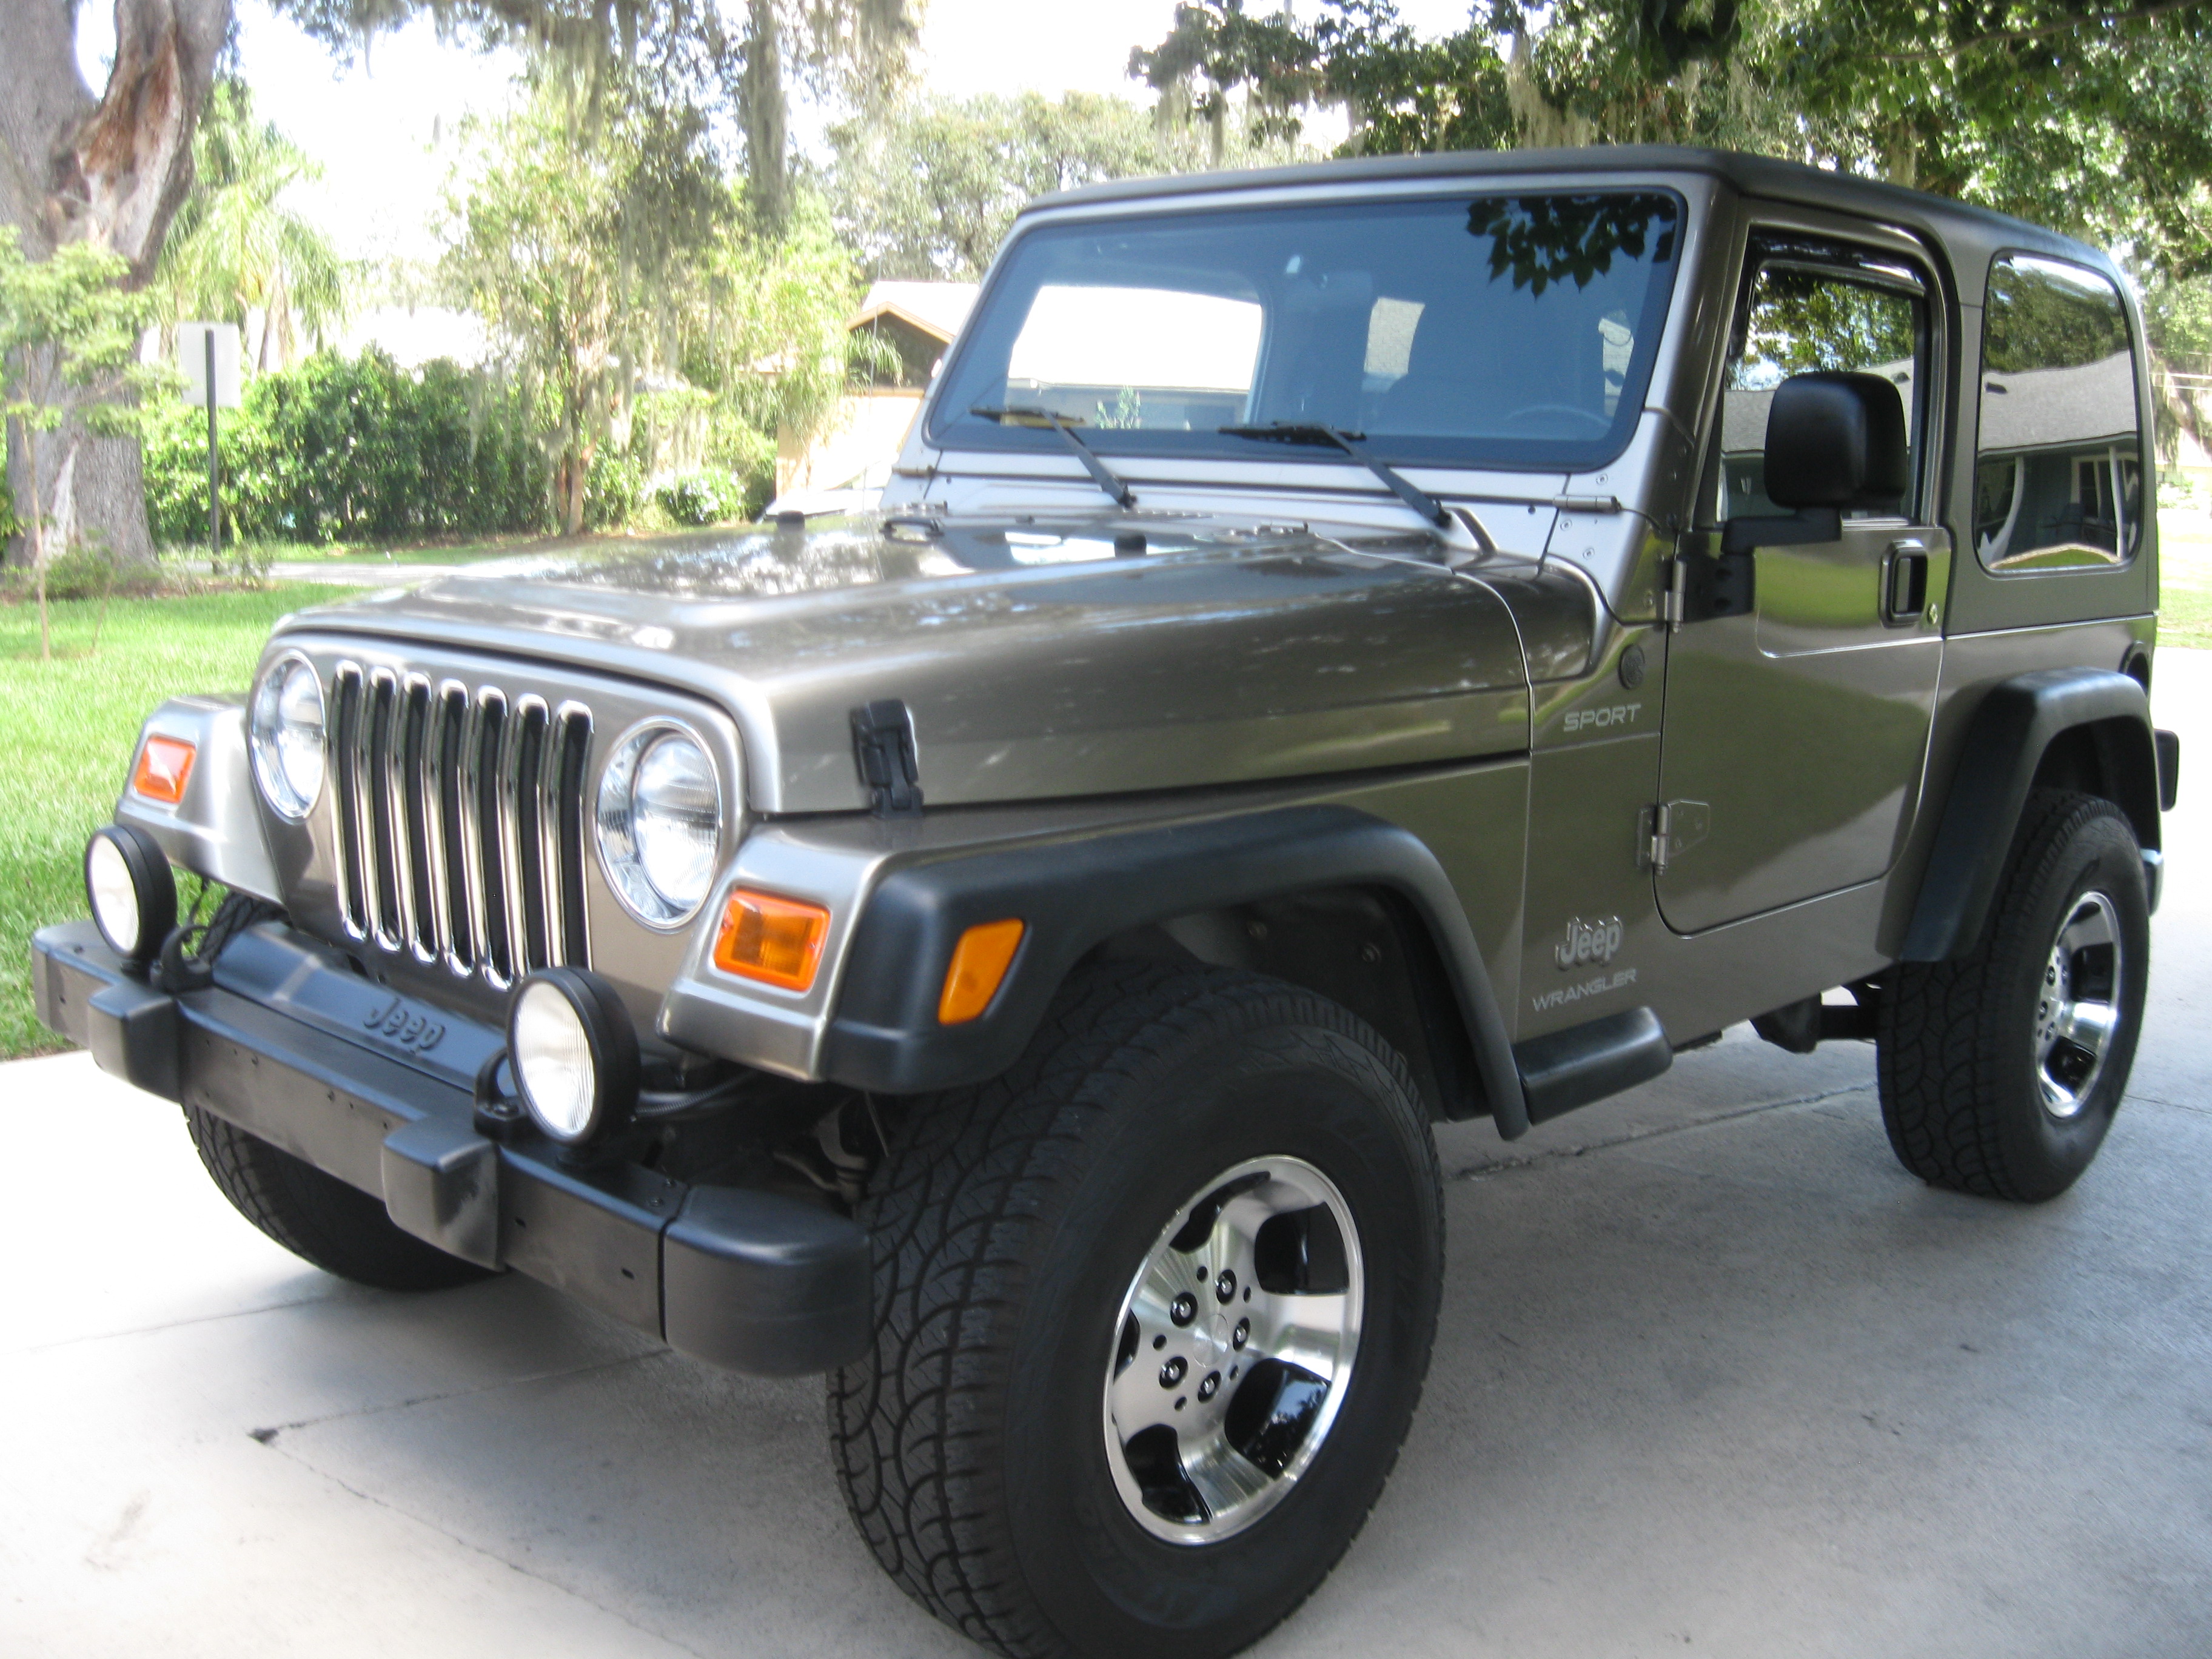 2004 Jeep Wrangler for Sale in Orlando, FL (Test Drive at Home) - Kelley  Blue Book